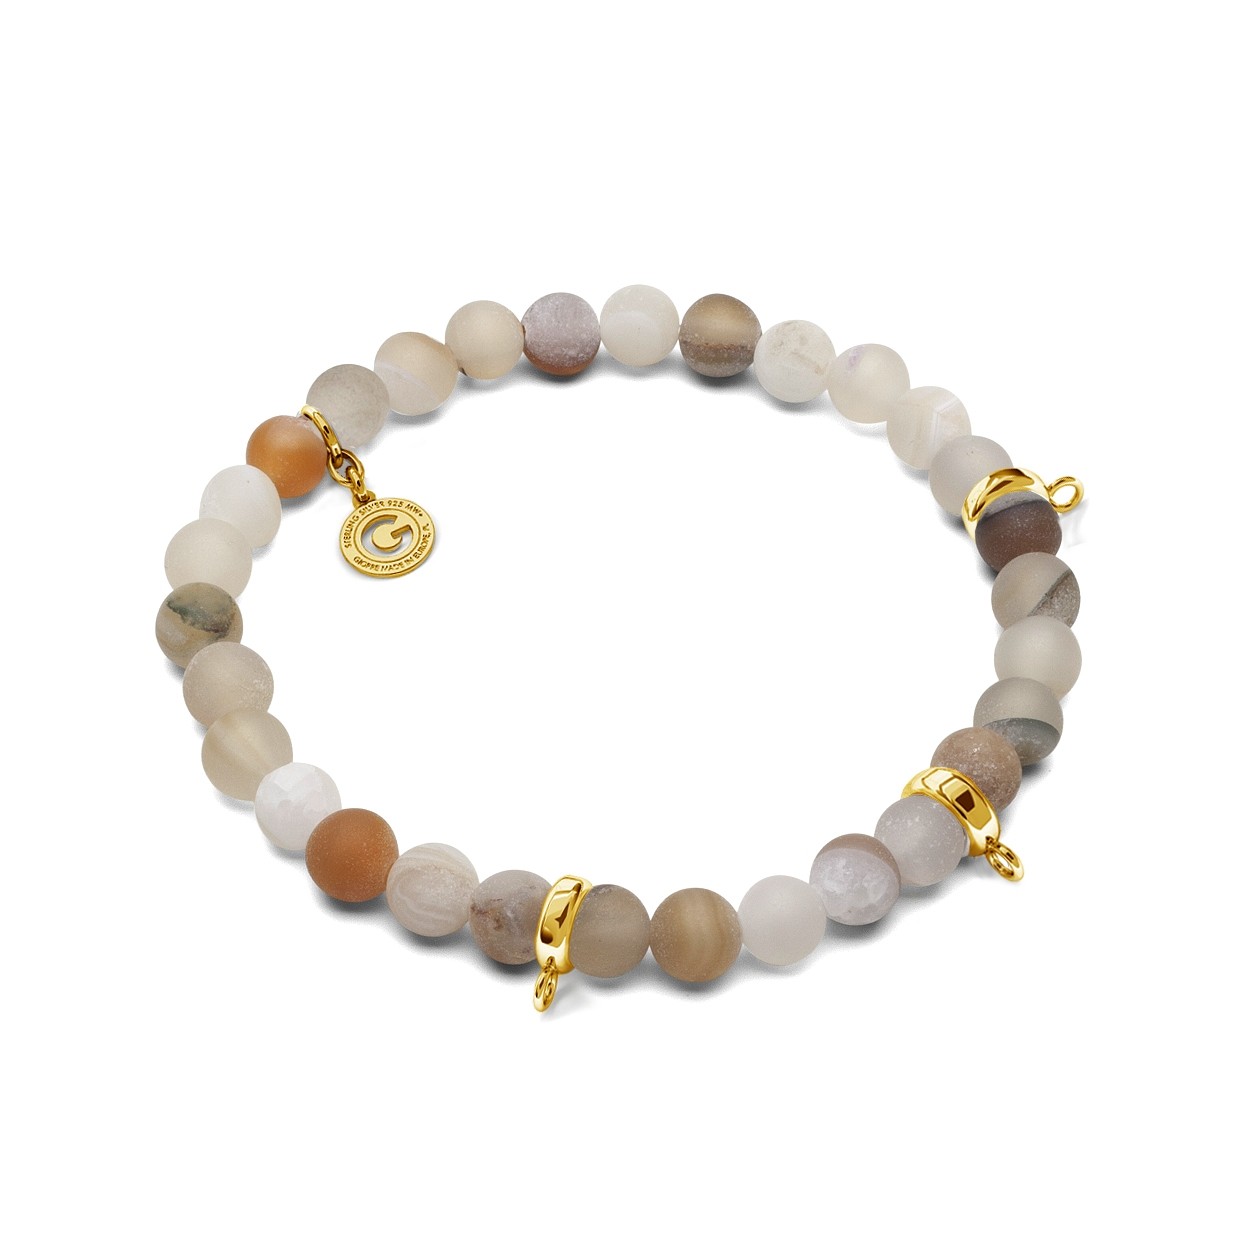 AGATE PALE, FLEXIBLE BRACELET FOR 3 CHARMS, WITH NATURAL STONES